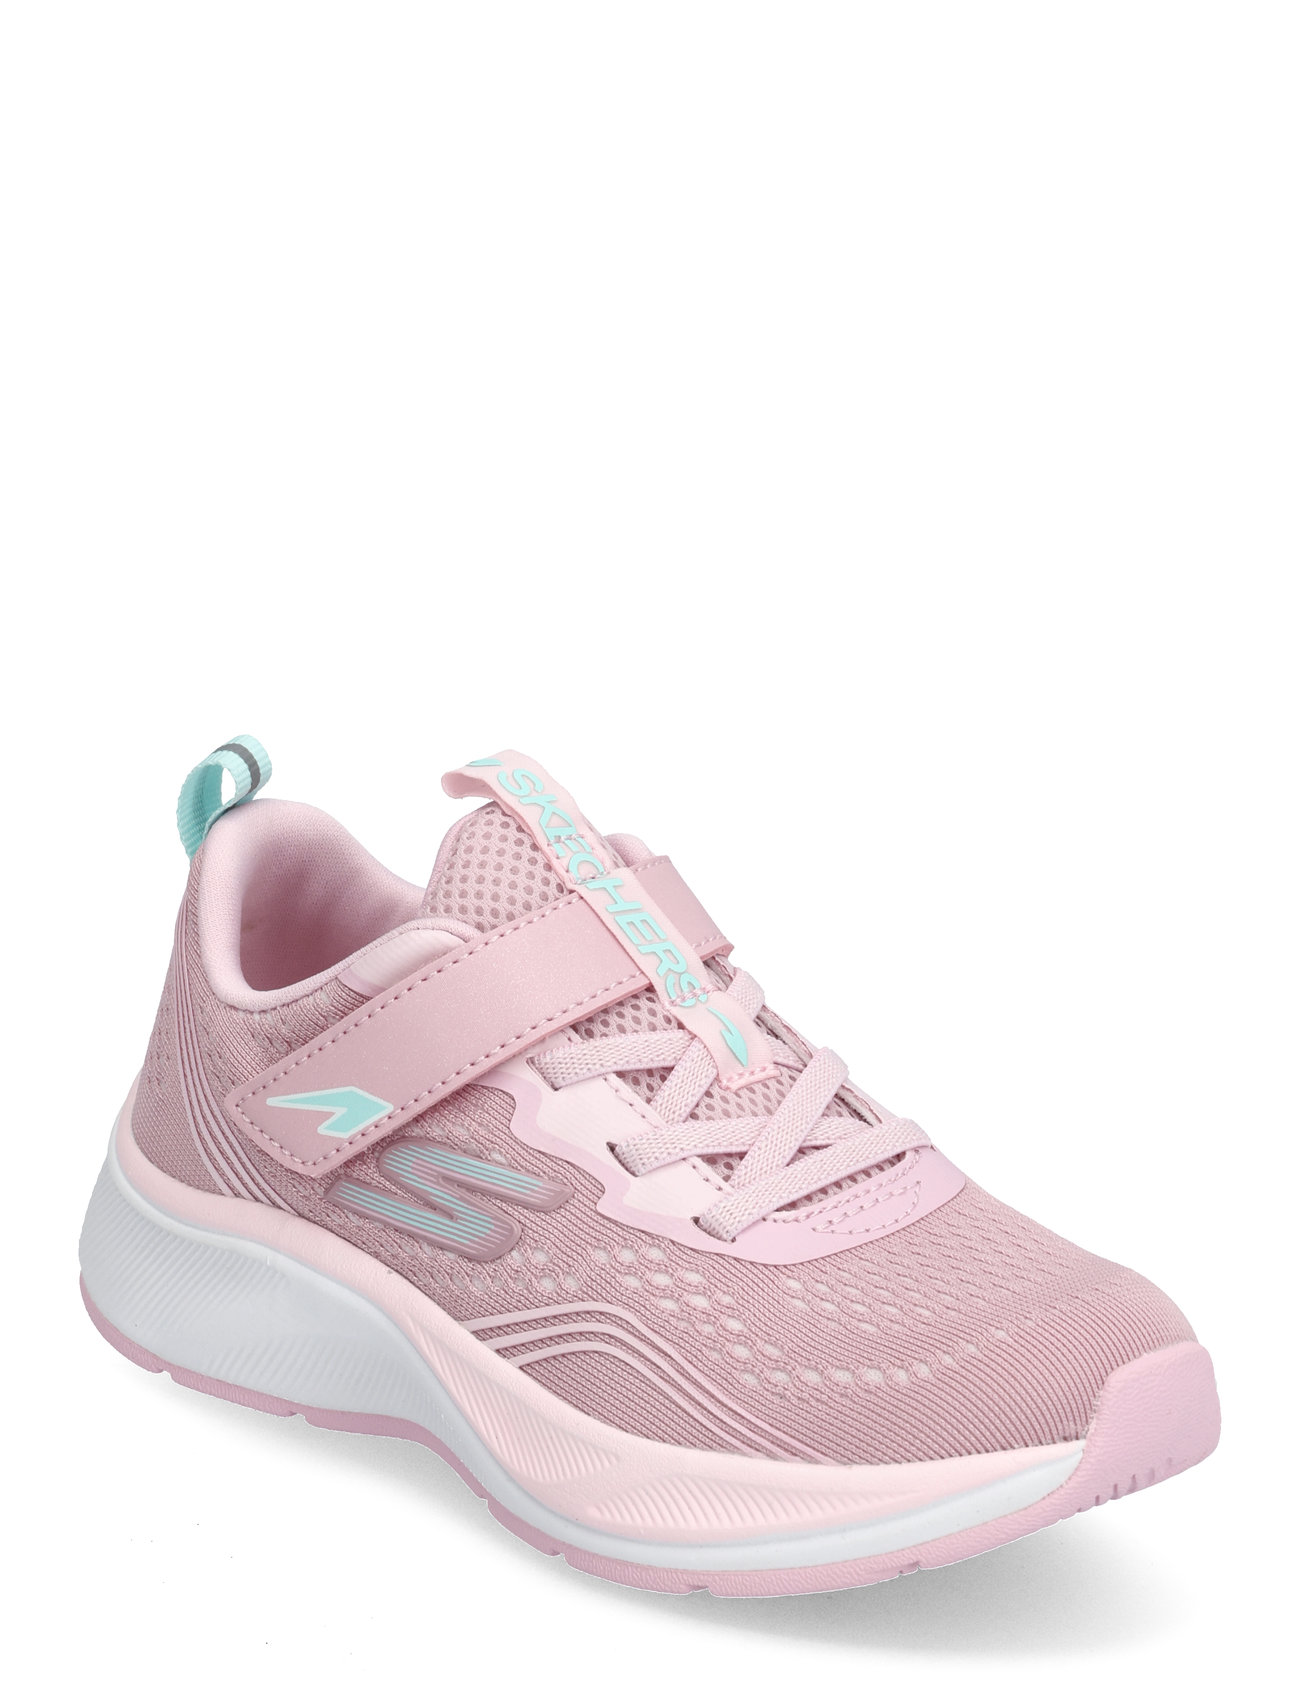 Girls Elite Sports - 3 2 Go Shoes Sports Shoes Running-training Shoes Pink Skechers